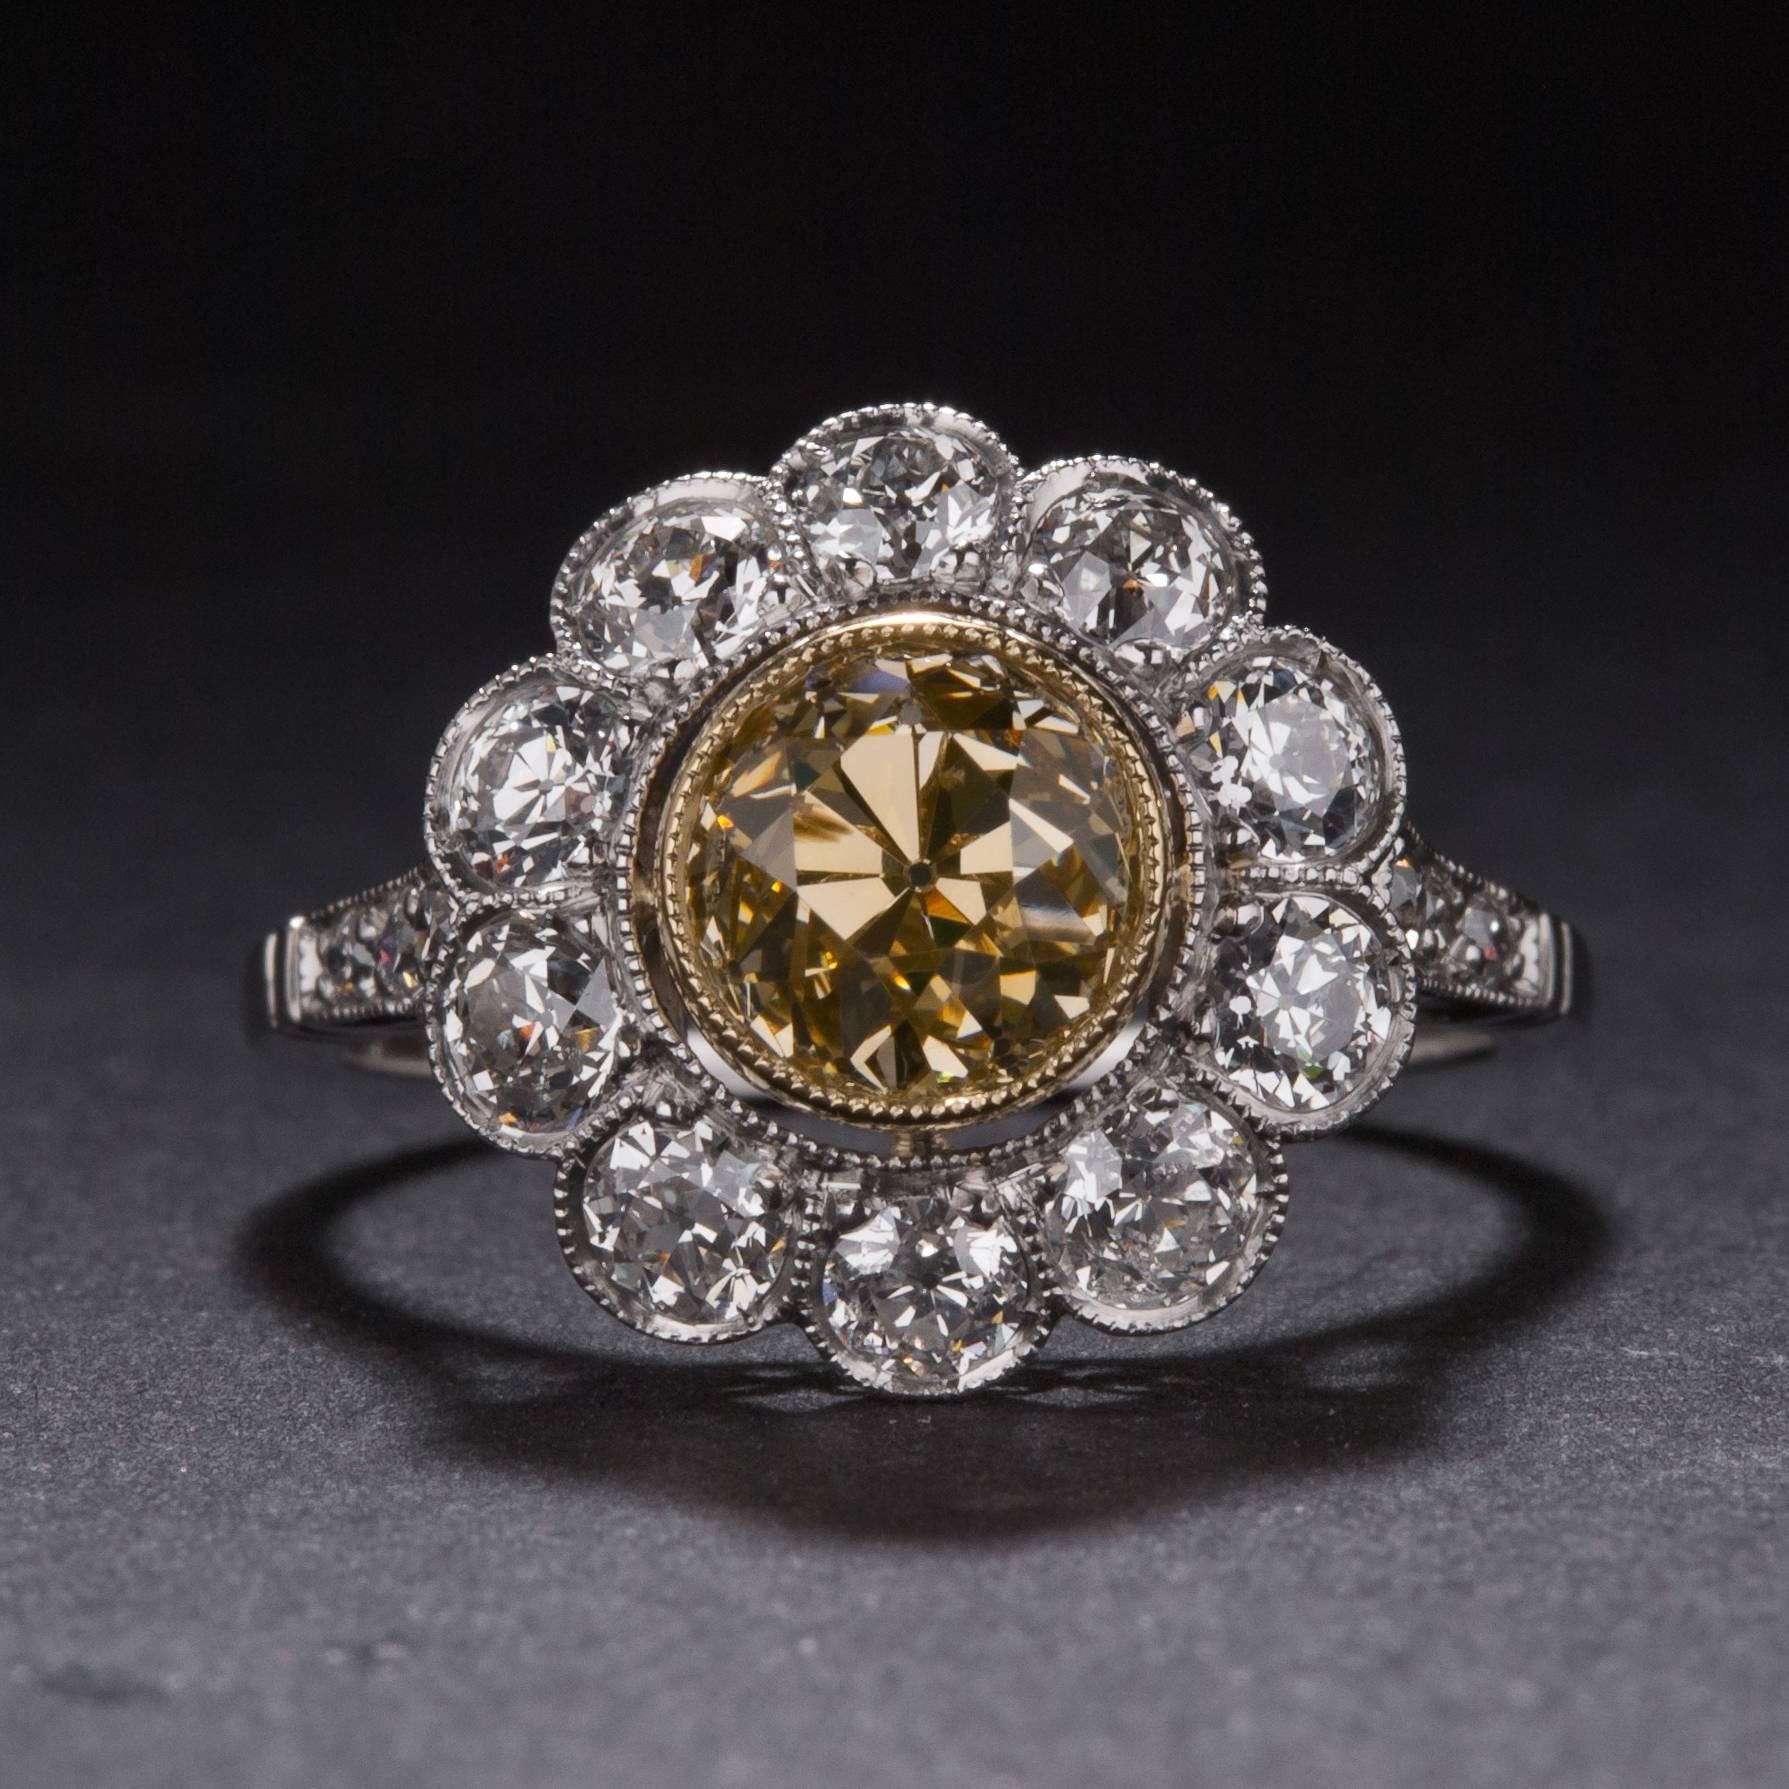 A lovely floral ring hand-crafted circa 1920. This Art Deco era piece features a 1.64 carat Old European Cut diamond (estimated VS clarity) and 16 accent diamond weighing a total of 1.05 carats. The mounting is crafted in platinum and it is